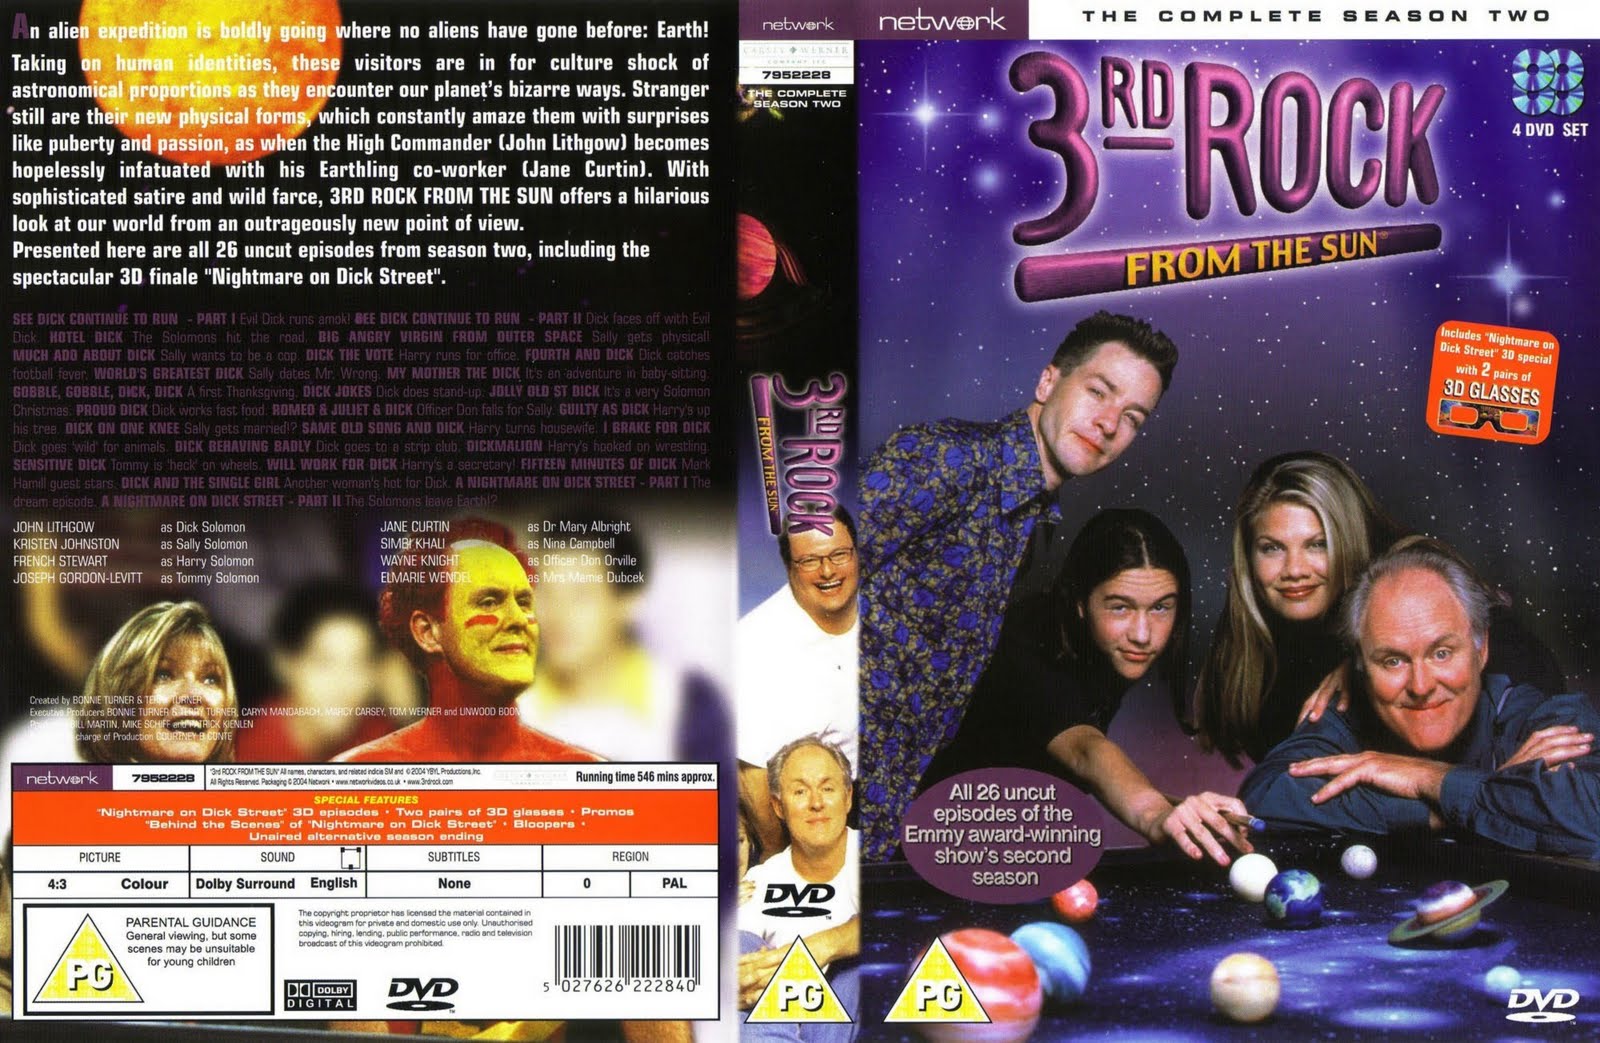 3rd rock from the sun dick and the single girl